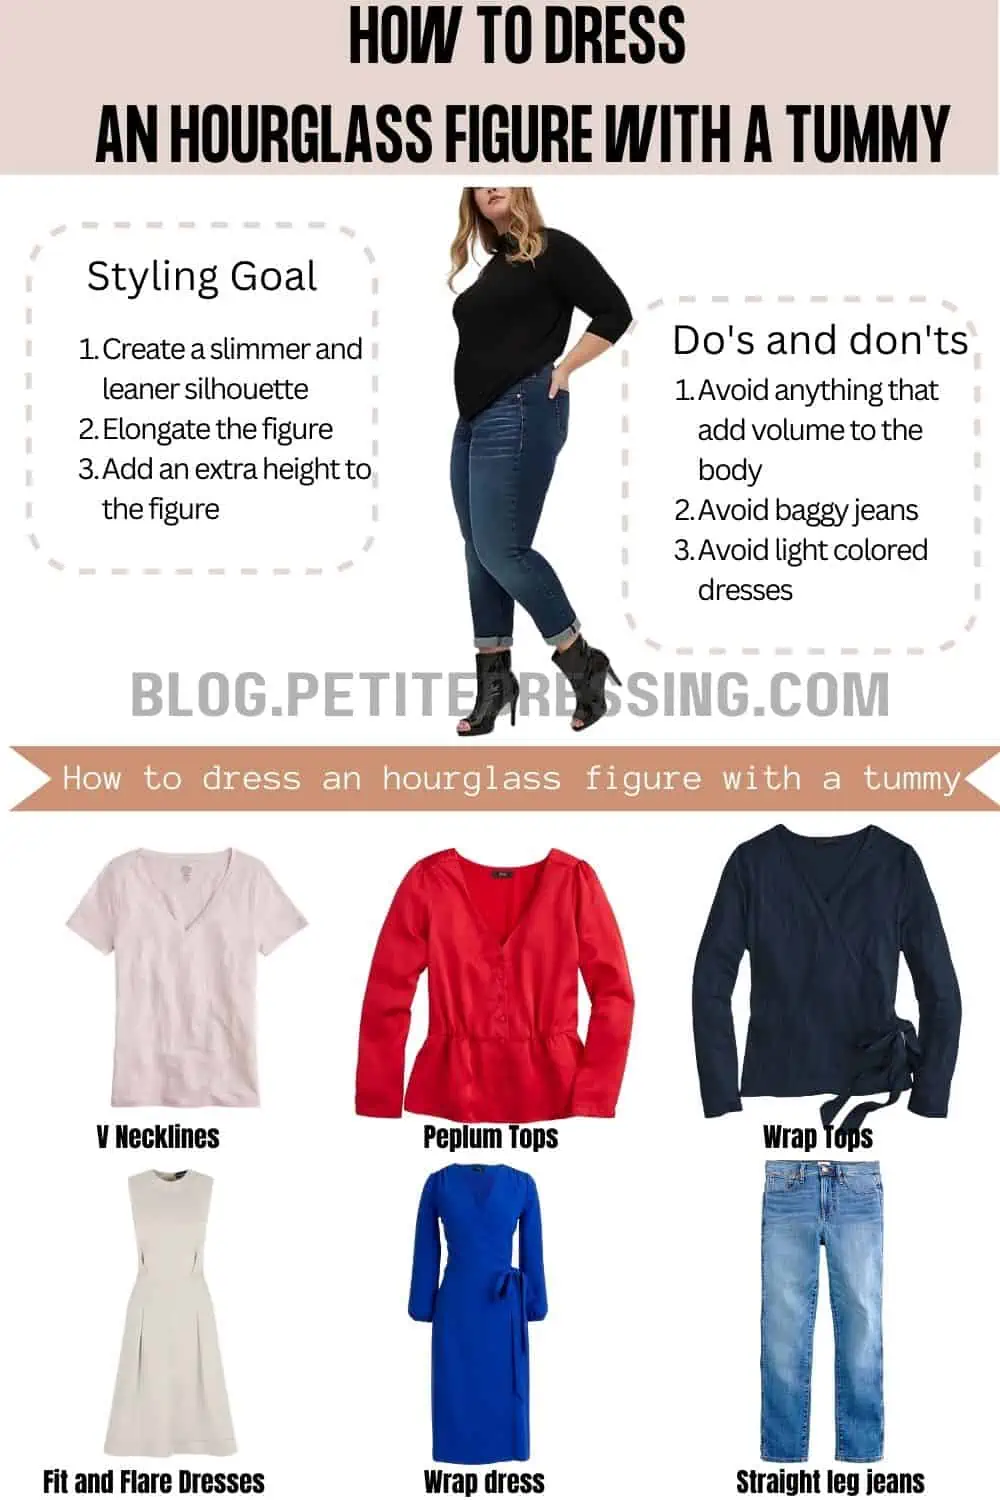 The Complete Style Guide for Skinny Hourglass Figure - Petite Dressing